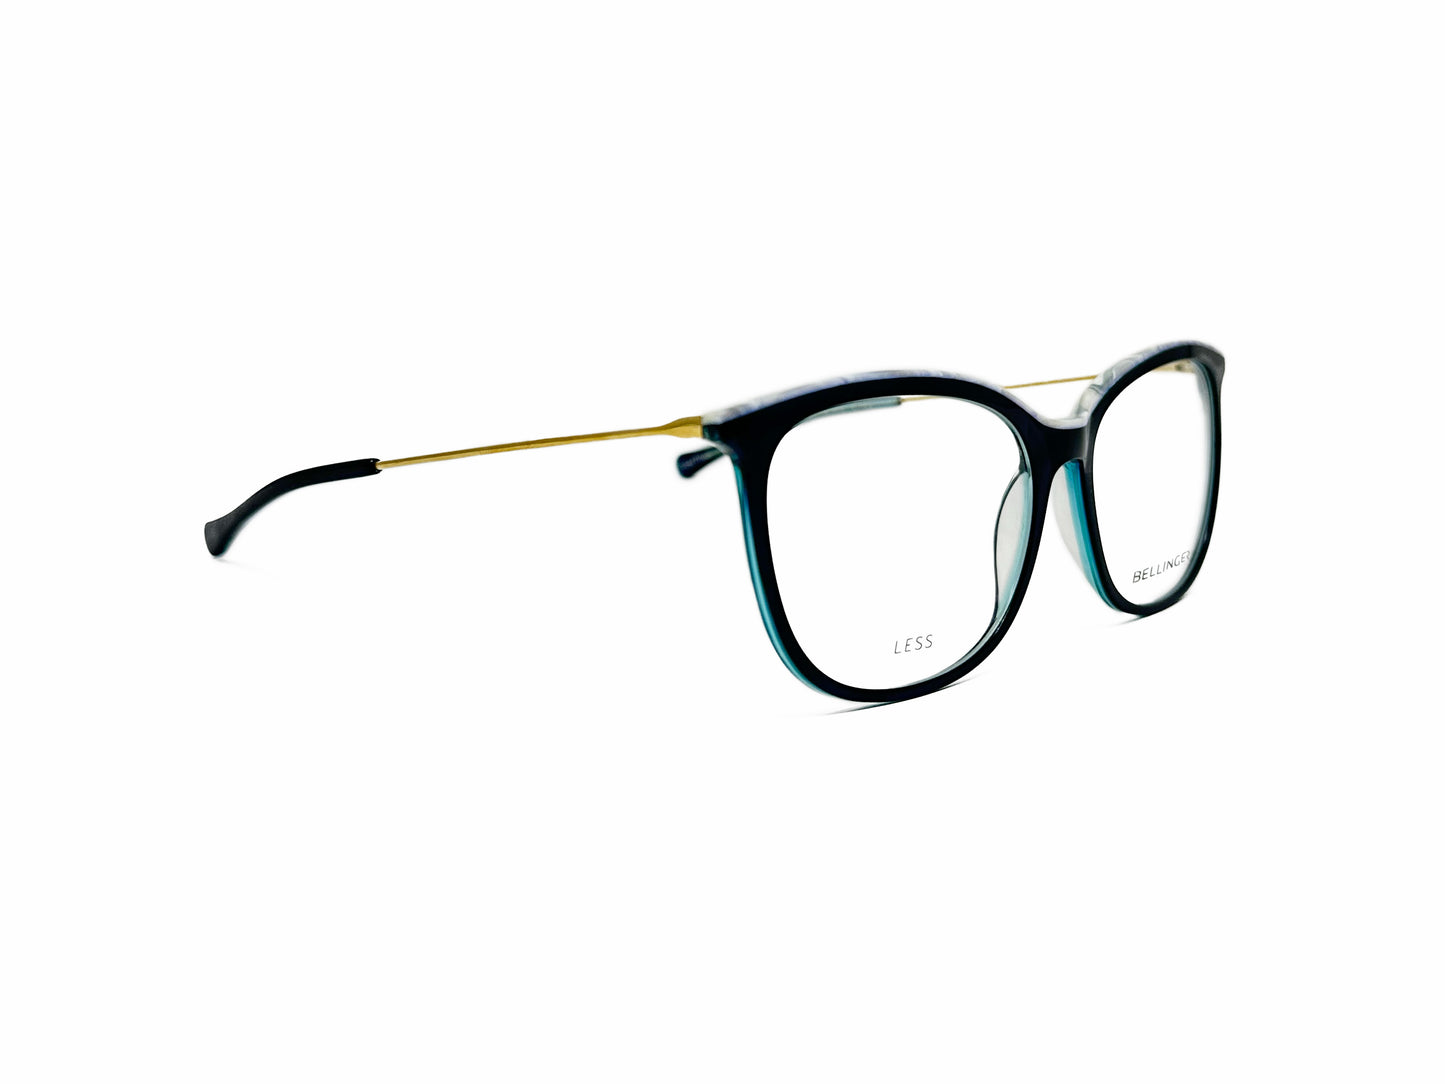 Bellinger rounded-square acetate optical frame. Model: Less1842. Color: 492 - Black with white marble trim on top and aqua blue lining on edges. Side view.